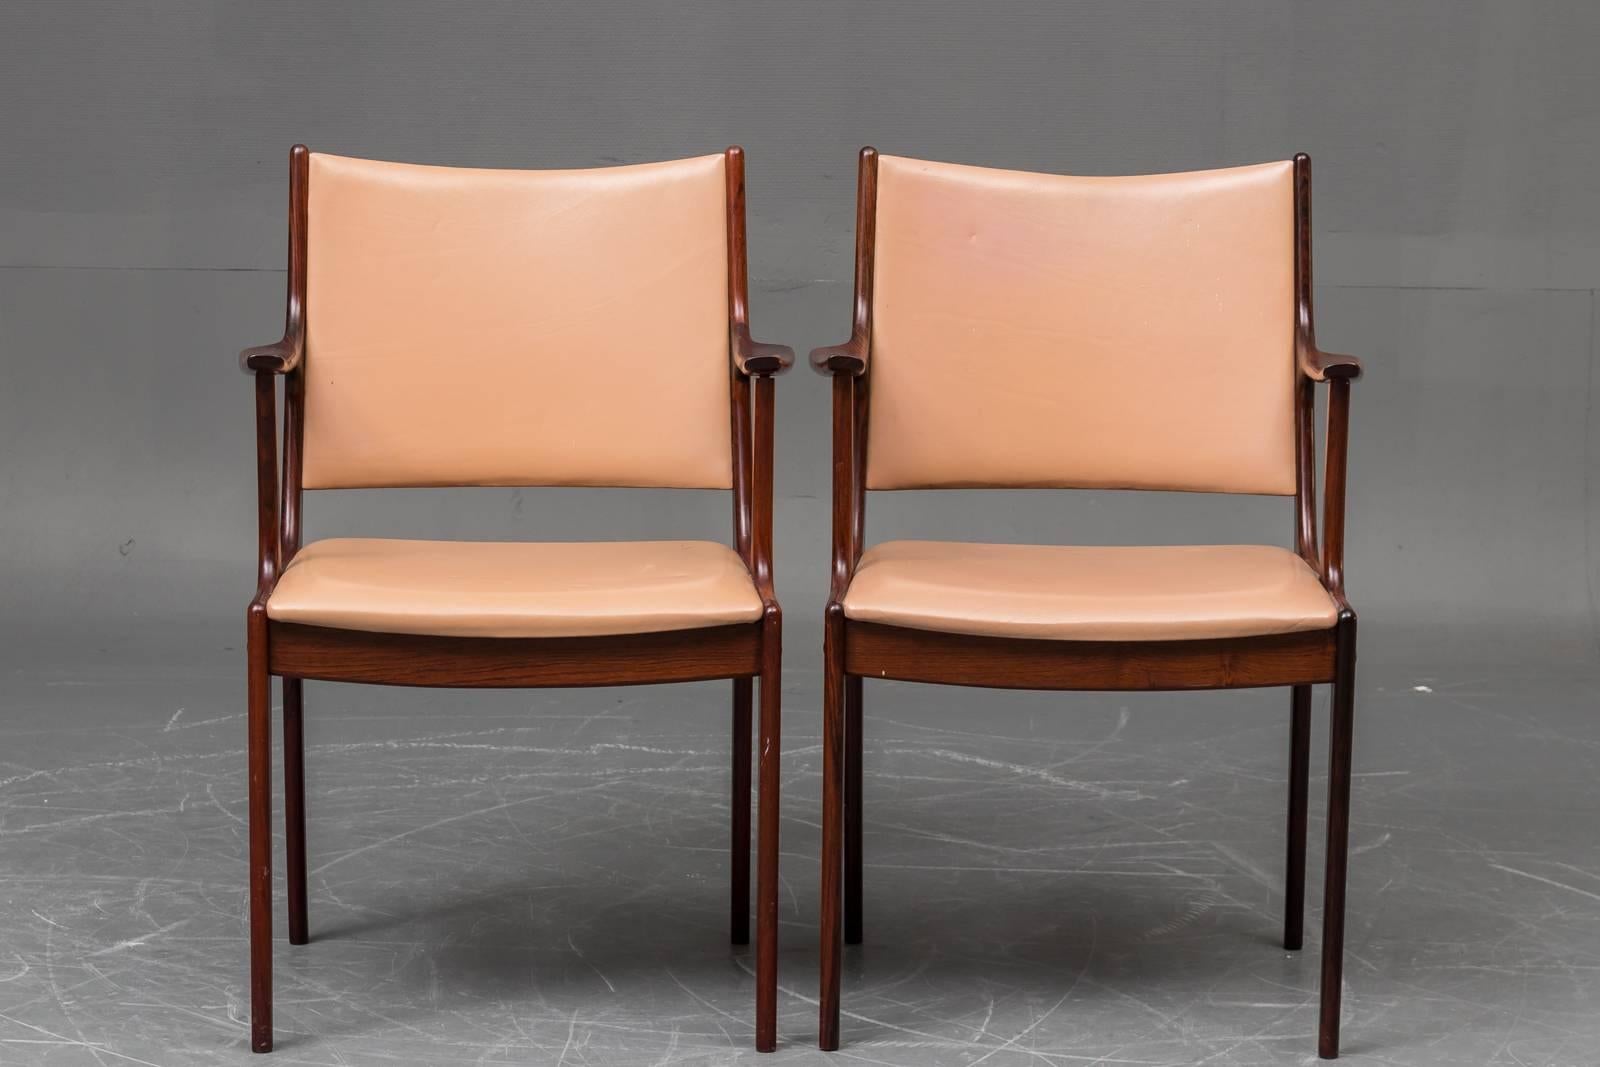 Set of two Danish armchairs in rosewood and brown leather by Johannes Andersen for Uldum Møbelfabrik.

The comfortable well made chairs with Johannes Andersens simple, light and elegant appearance have been refinished by our cabinetmaker and are in